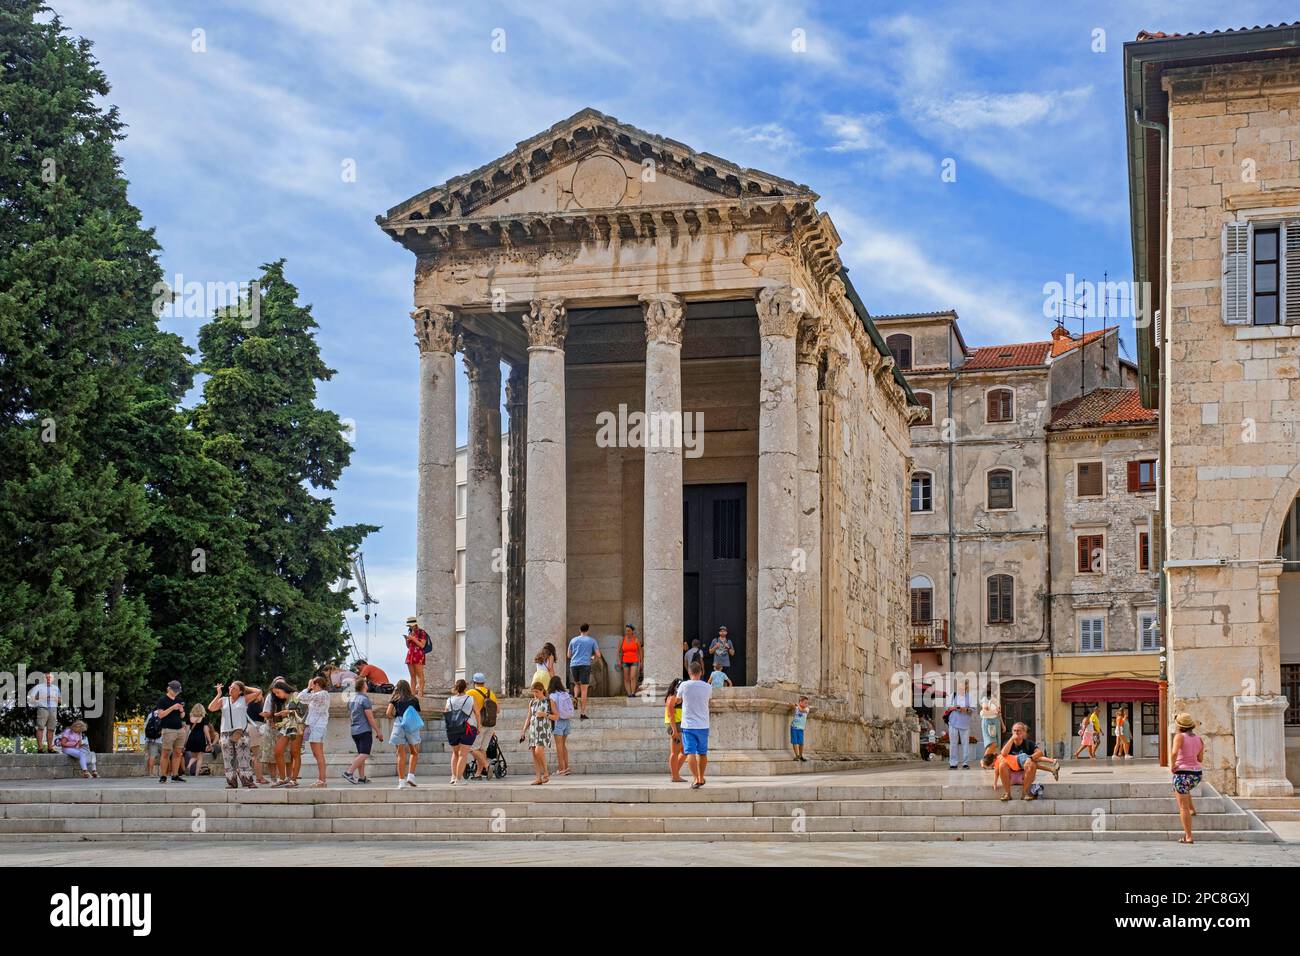 Augustov hram, Roman Temple of Augustus with Corinthian columns in the historic town centre of the city Pula / Pola, Istria County, Croatia Stock Photo